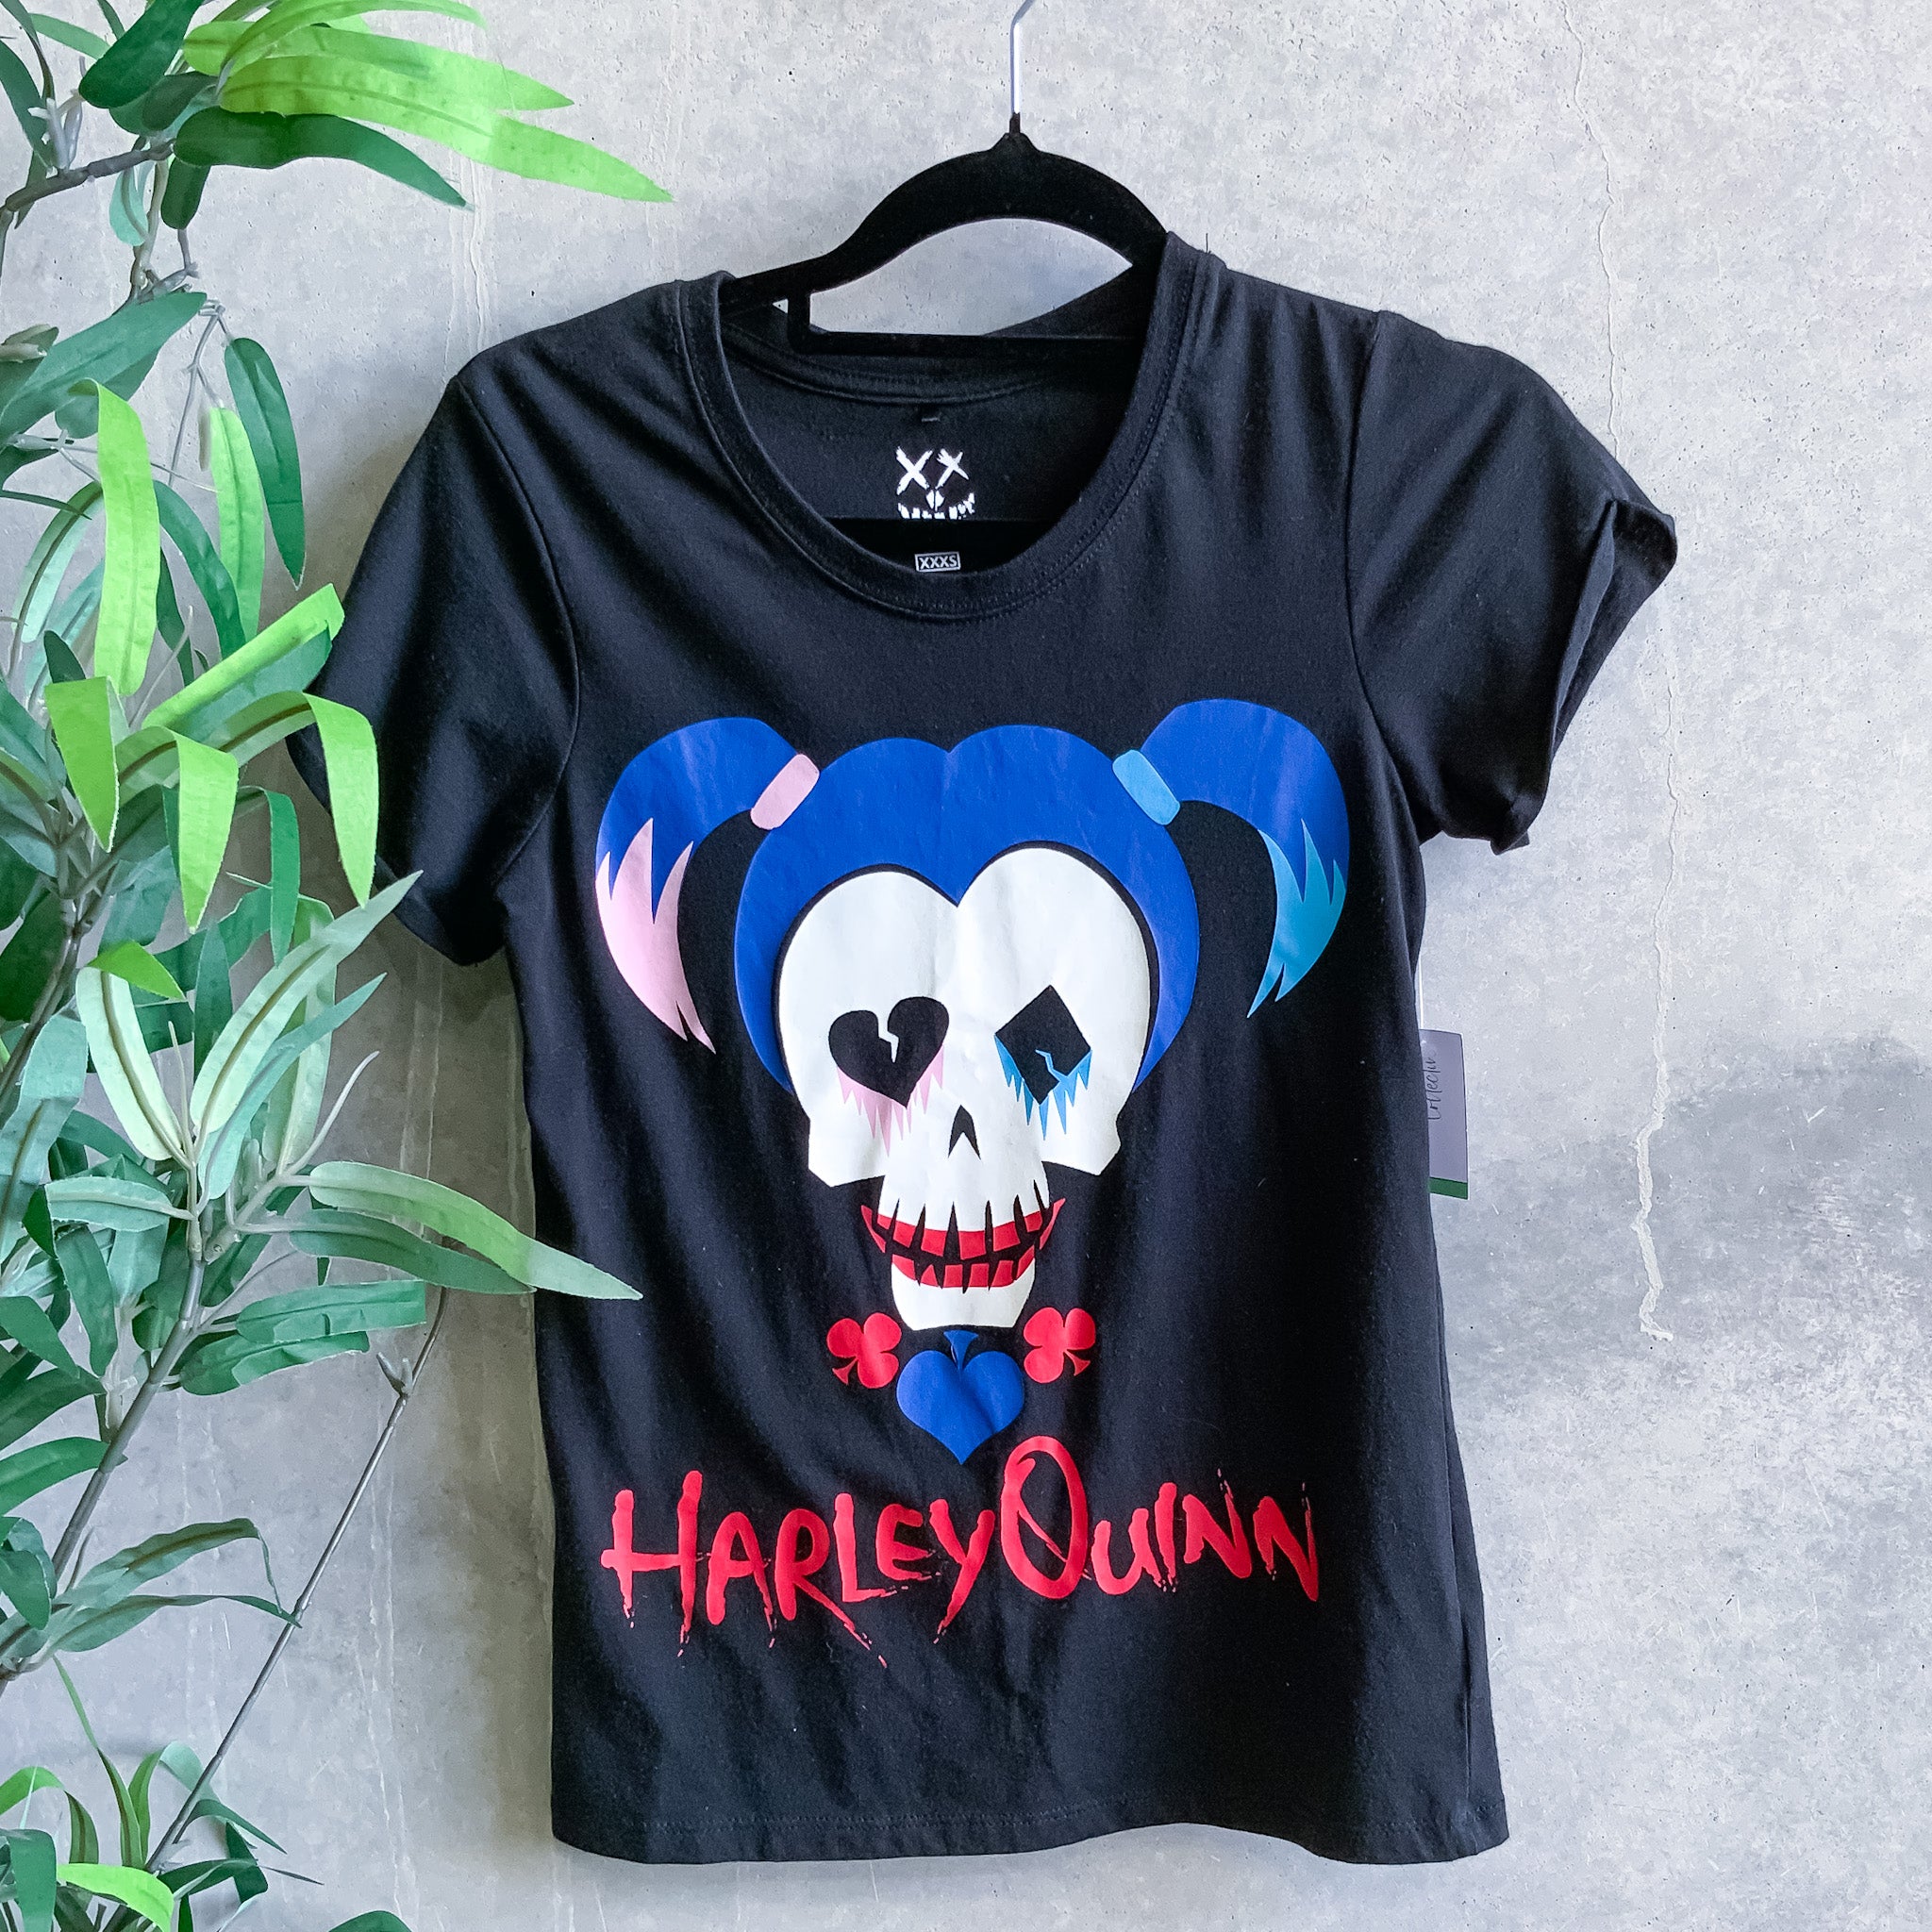 Harley Quinn Suicide Squad Halloween Print T Shirt/Tee - Size XS